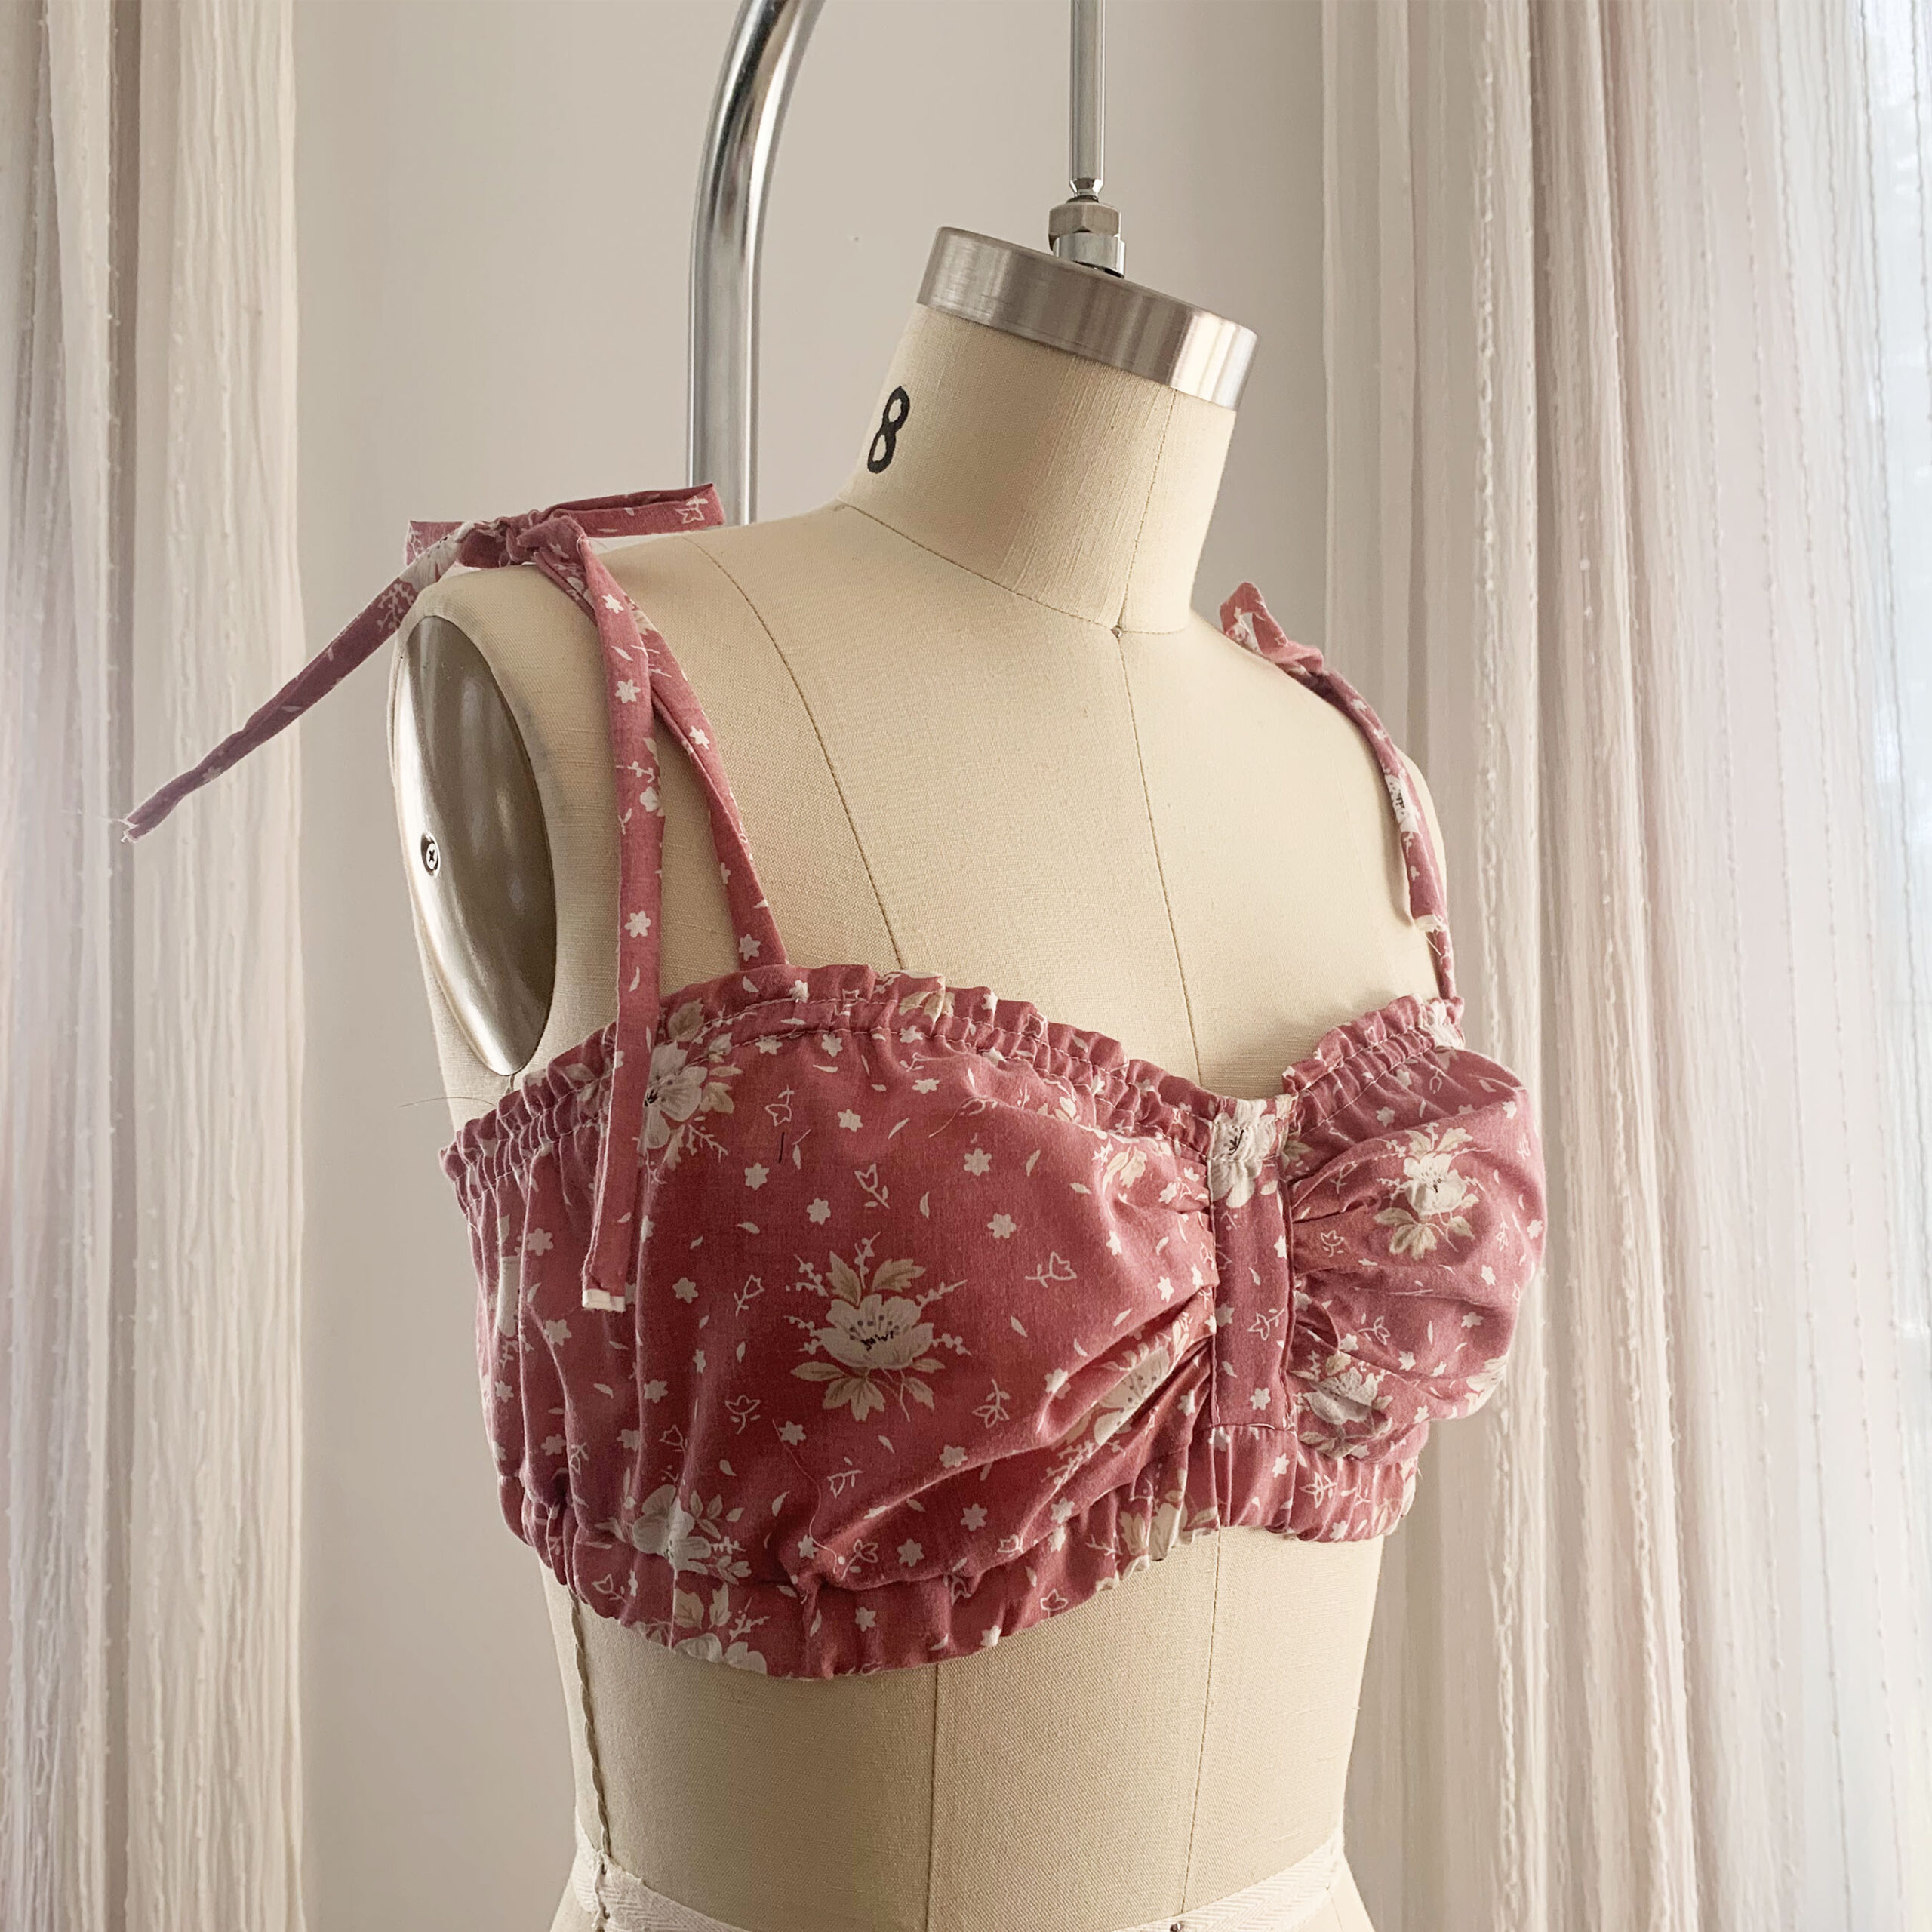 Jasmine Bra Pattern XS-2XL in Standard and Large DD+ Cup Sizes